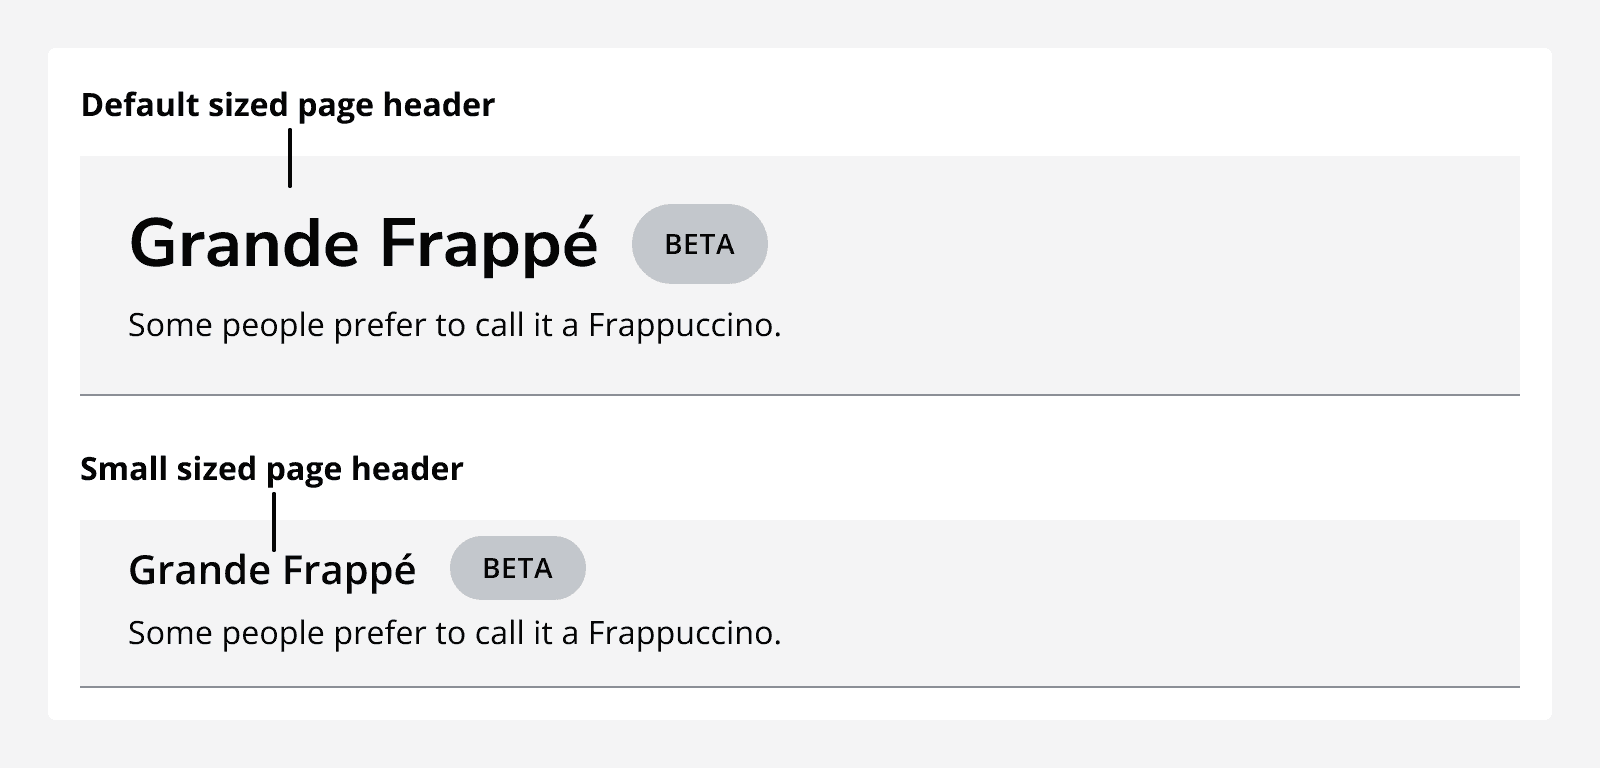 A default sized page header with a large title that says ‘Grande Frappé’ and small sized page header with the same title displayed much smaller.